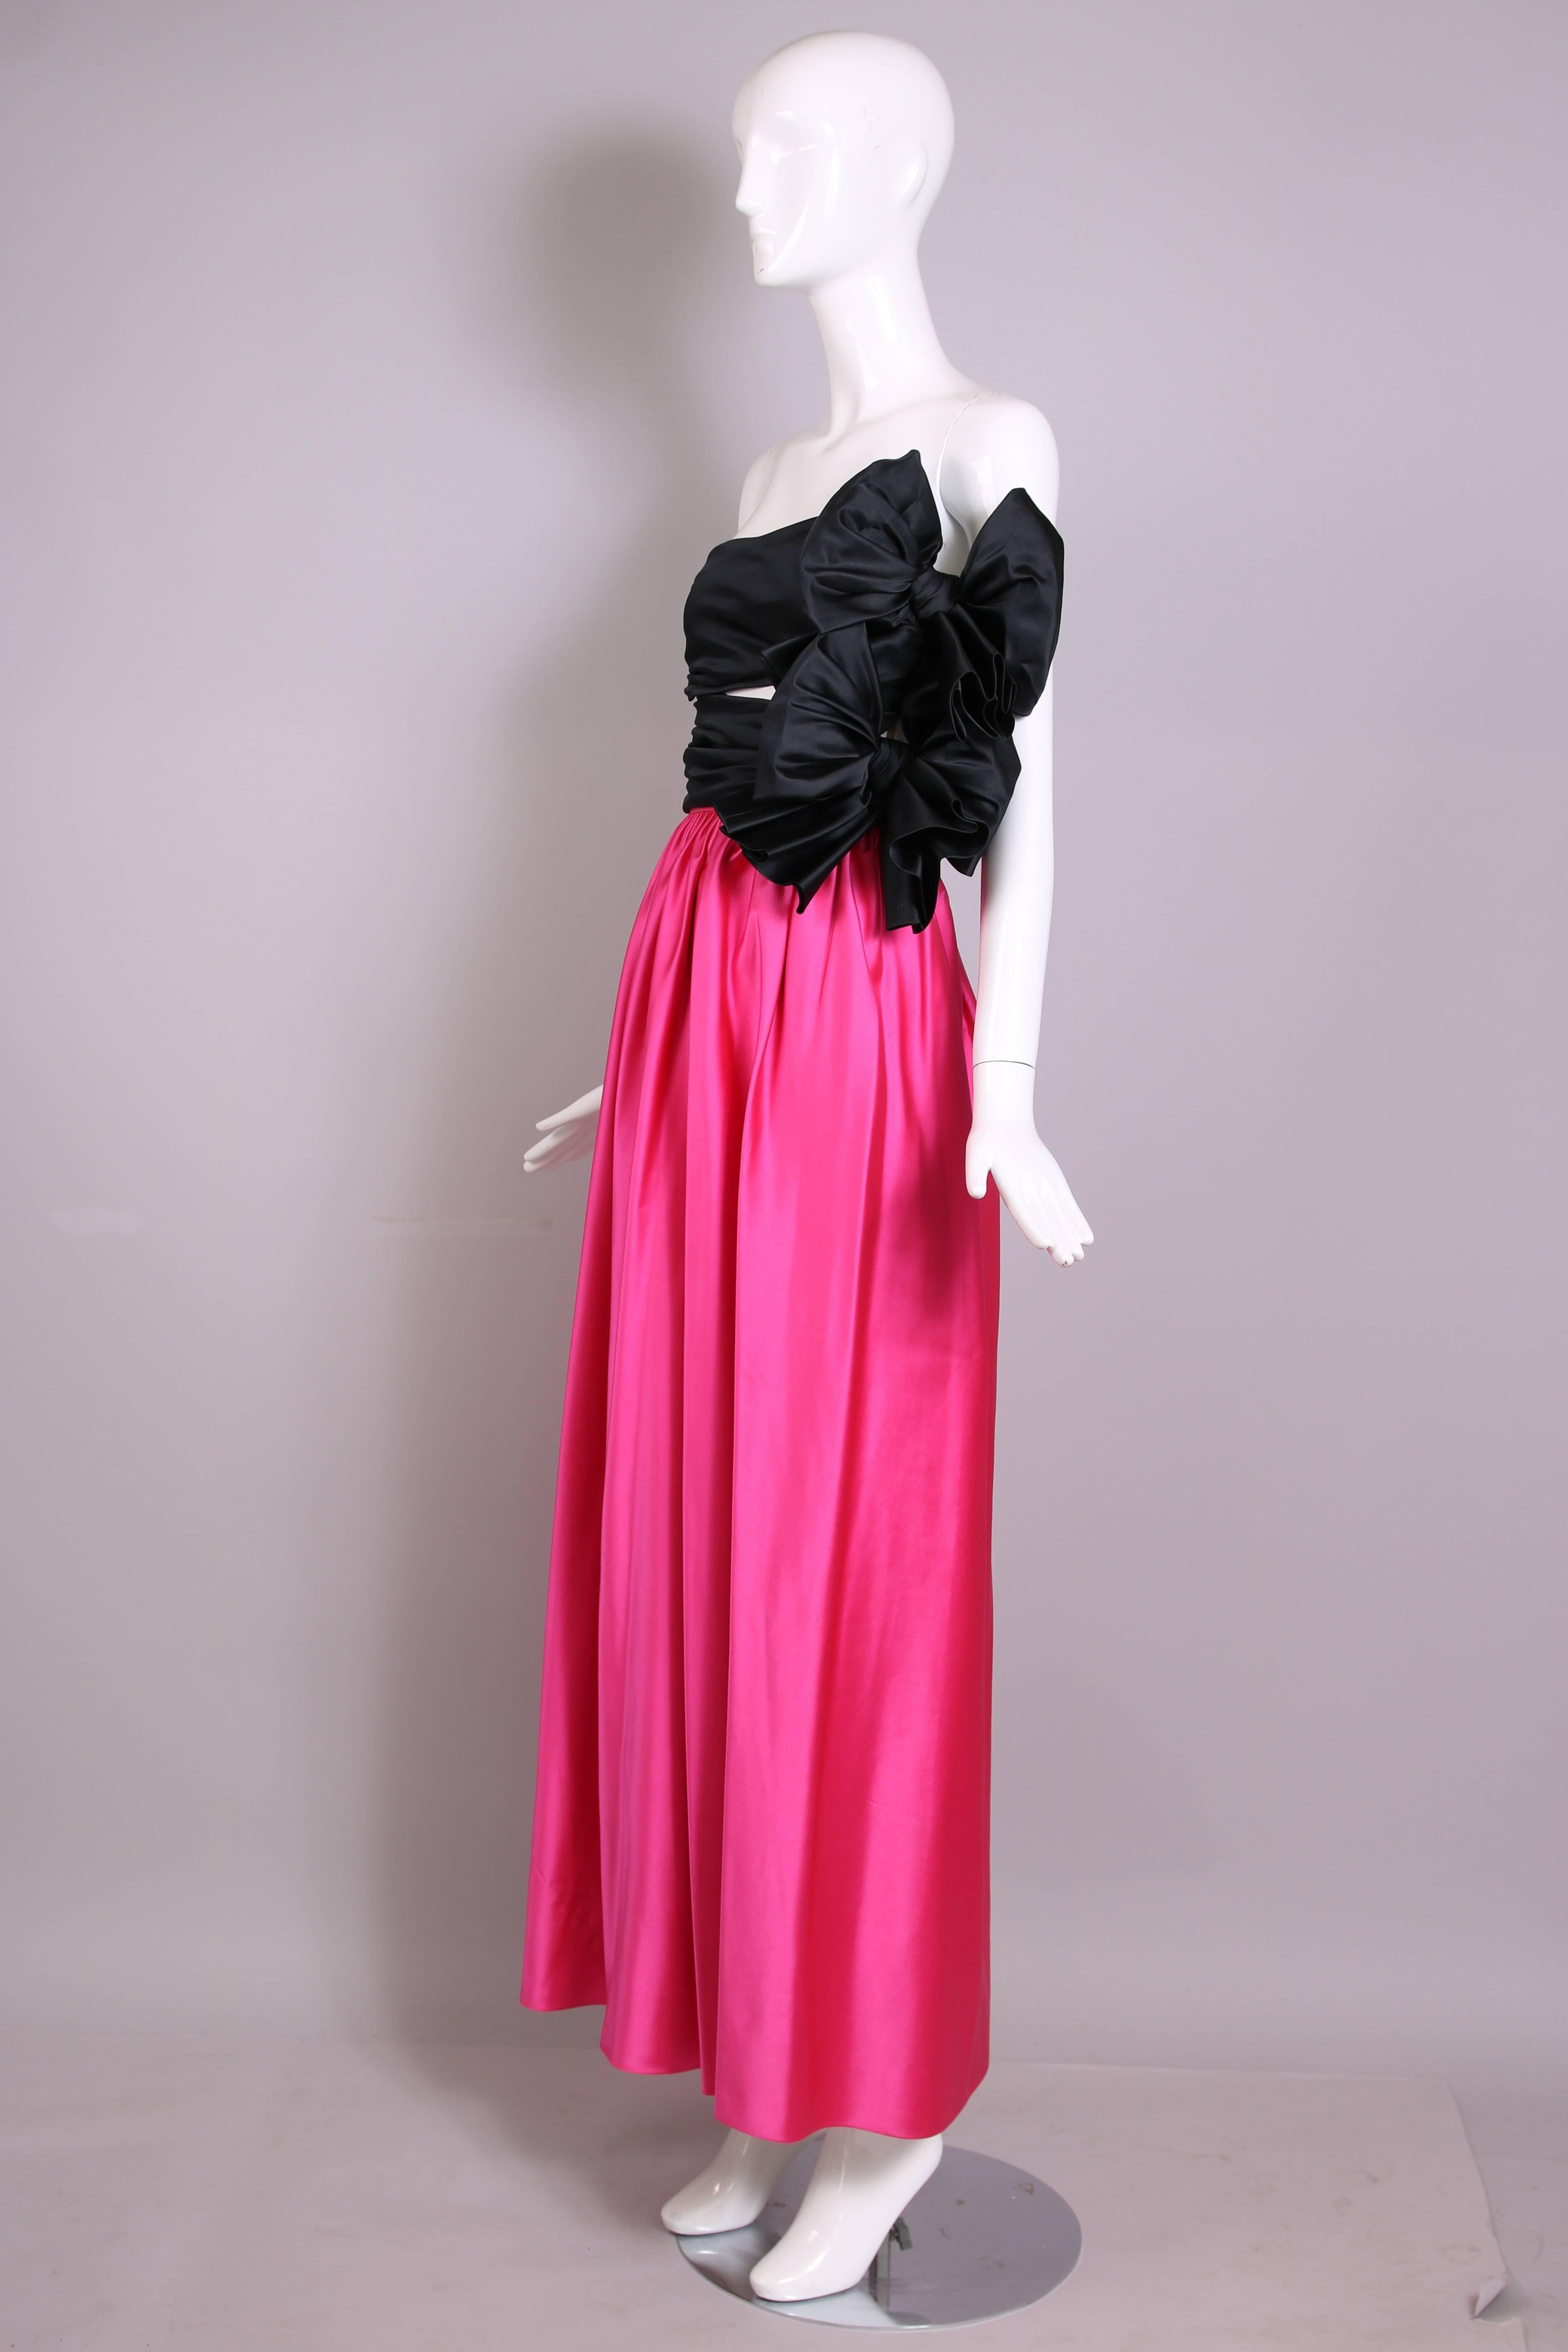 1979 Lanvin Haute Couture Pink & Black Satin Strapless Evening Gown No. 90724 In Excellent Condition In Studio City, CA